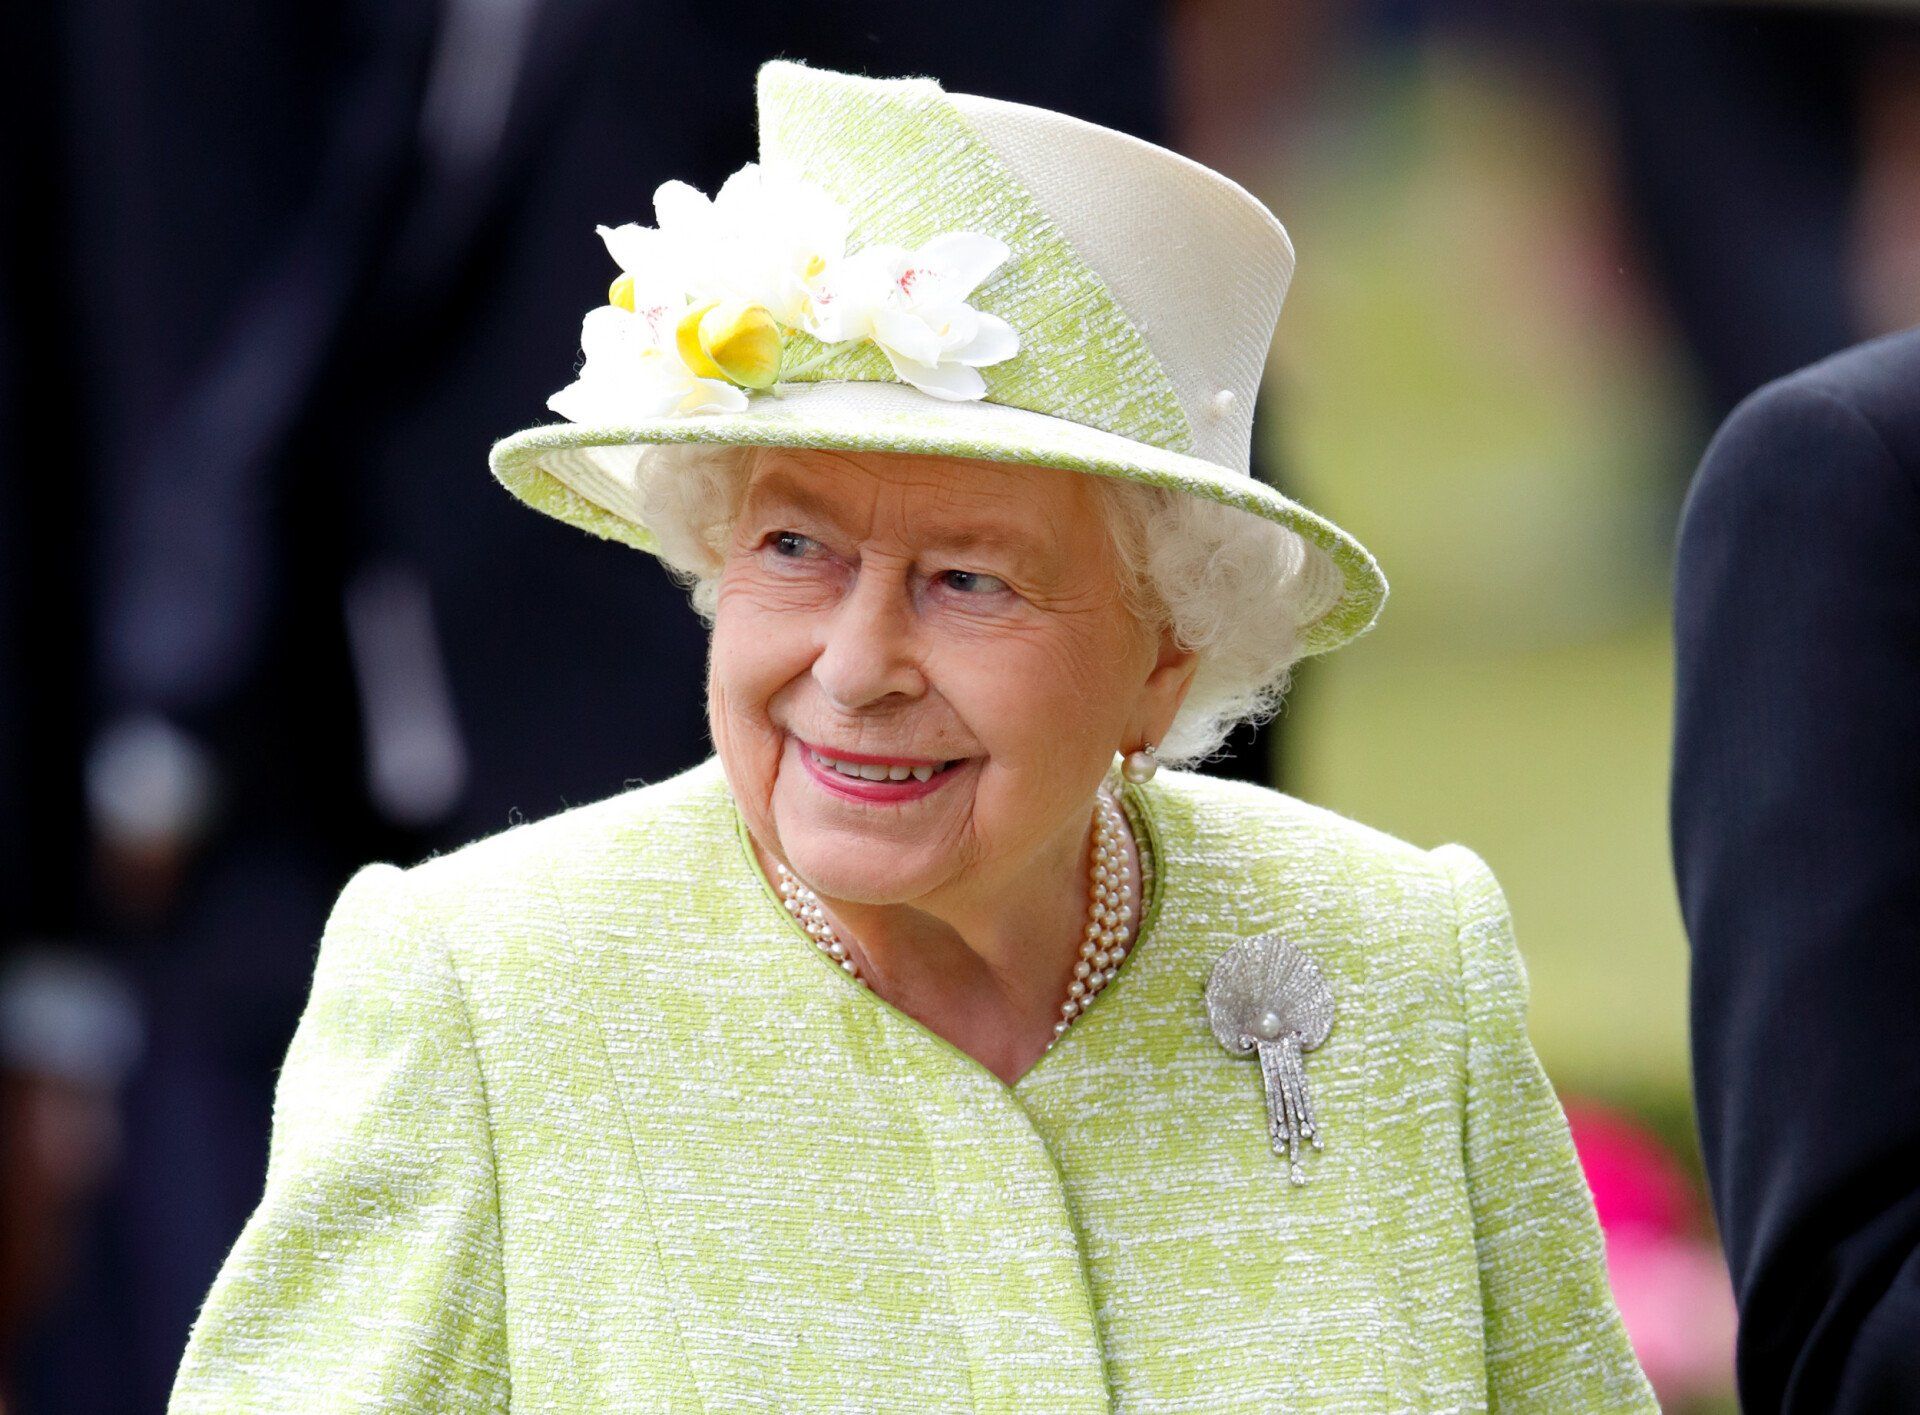 Queen Elizabeth II, who reigned over the U.K. for 70 years, dies at 96